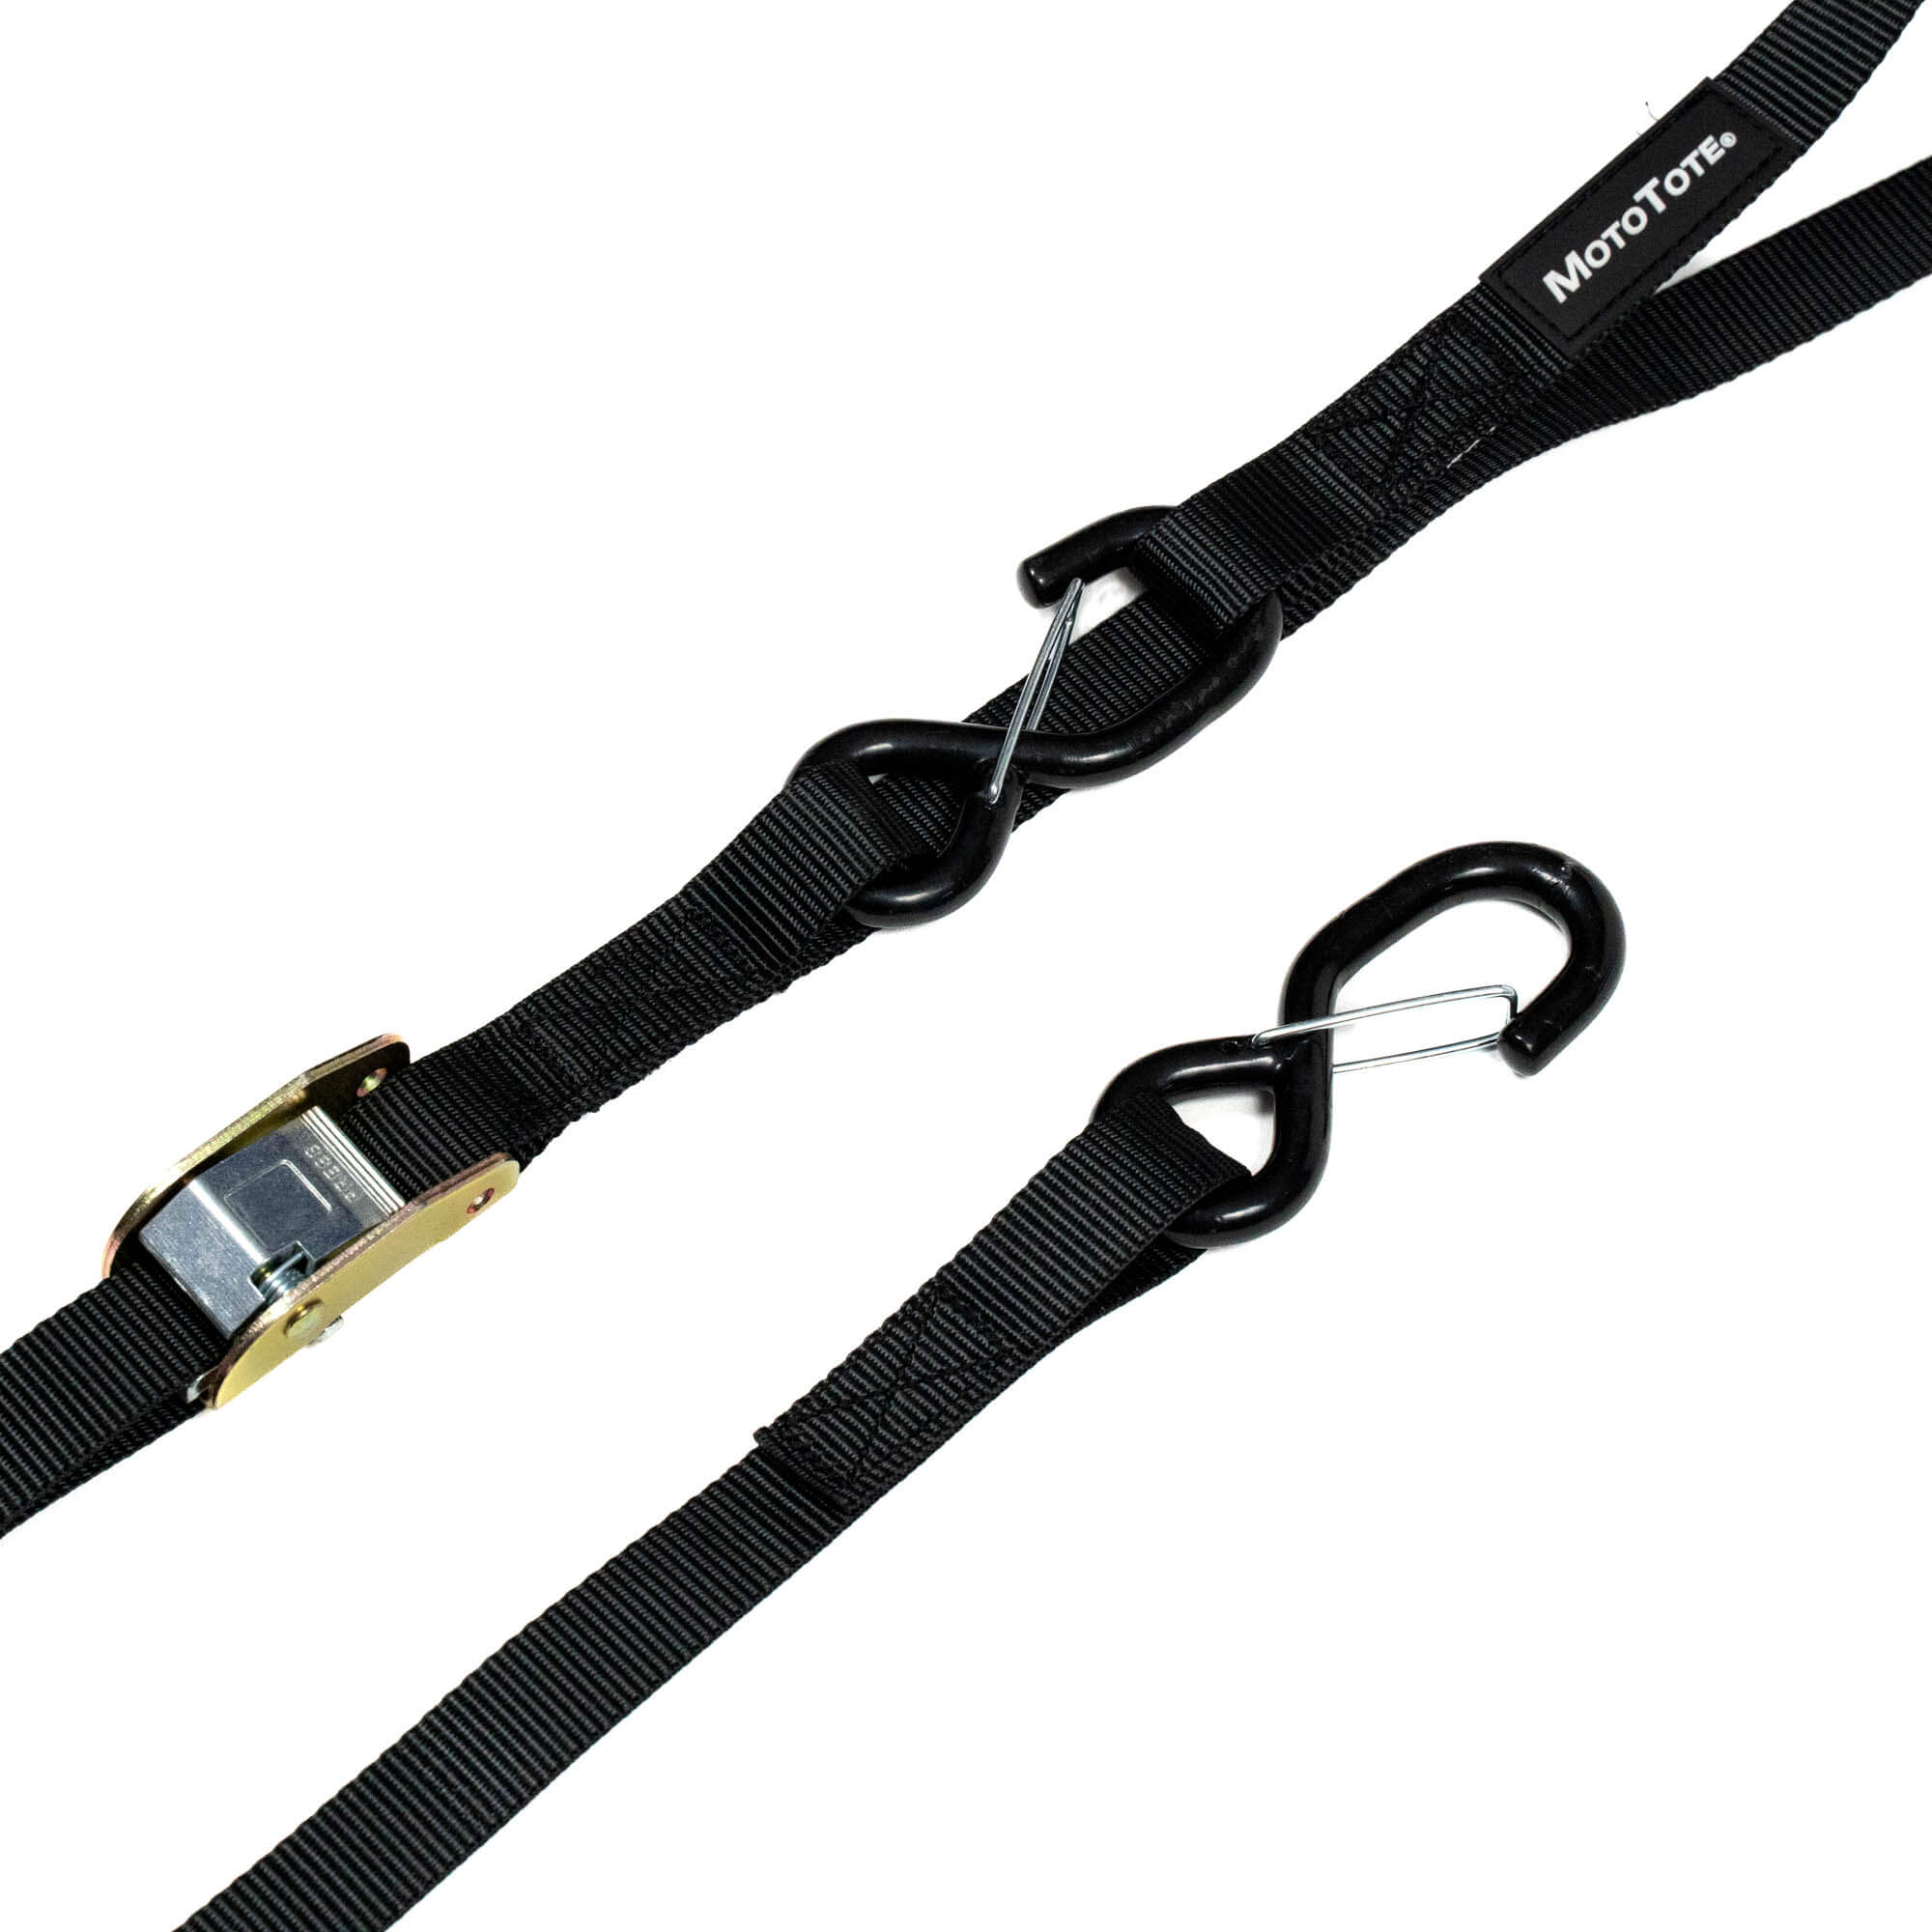 2 Inch X 8 Foot Cam Buckle Strap With Flat Snap Hook Fittings, Works Great  with L Track Tie Downs, Secure Motorcycles, Dirt Bikes, ATVs, Snowmobiles -  China ratchet strap, cargo straps